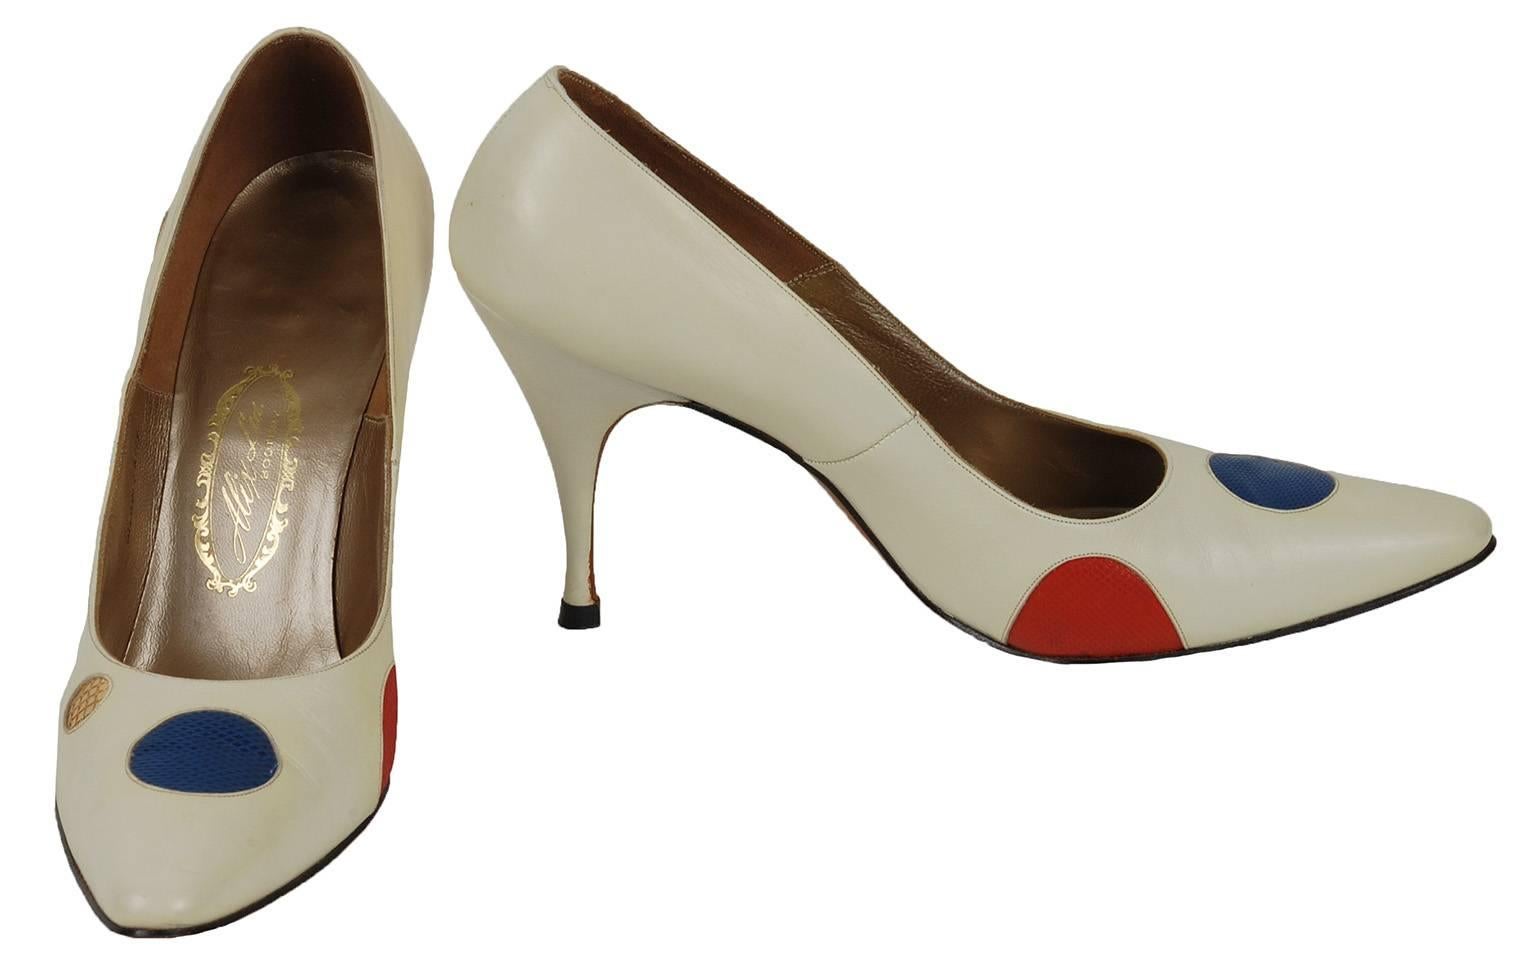 They may date from the 1950s, but they scream Eighties Nu Wave to us.  And thanks to polka dots in red, yellow, blue, green AND gold you can wear them with all the eras in between.

Ivory leather pointed toe pump inset with multicolored reptile skin